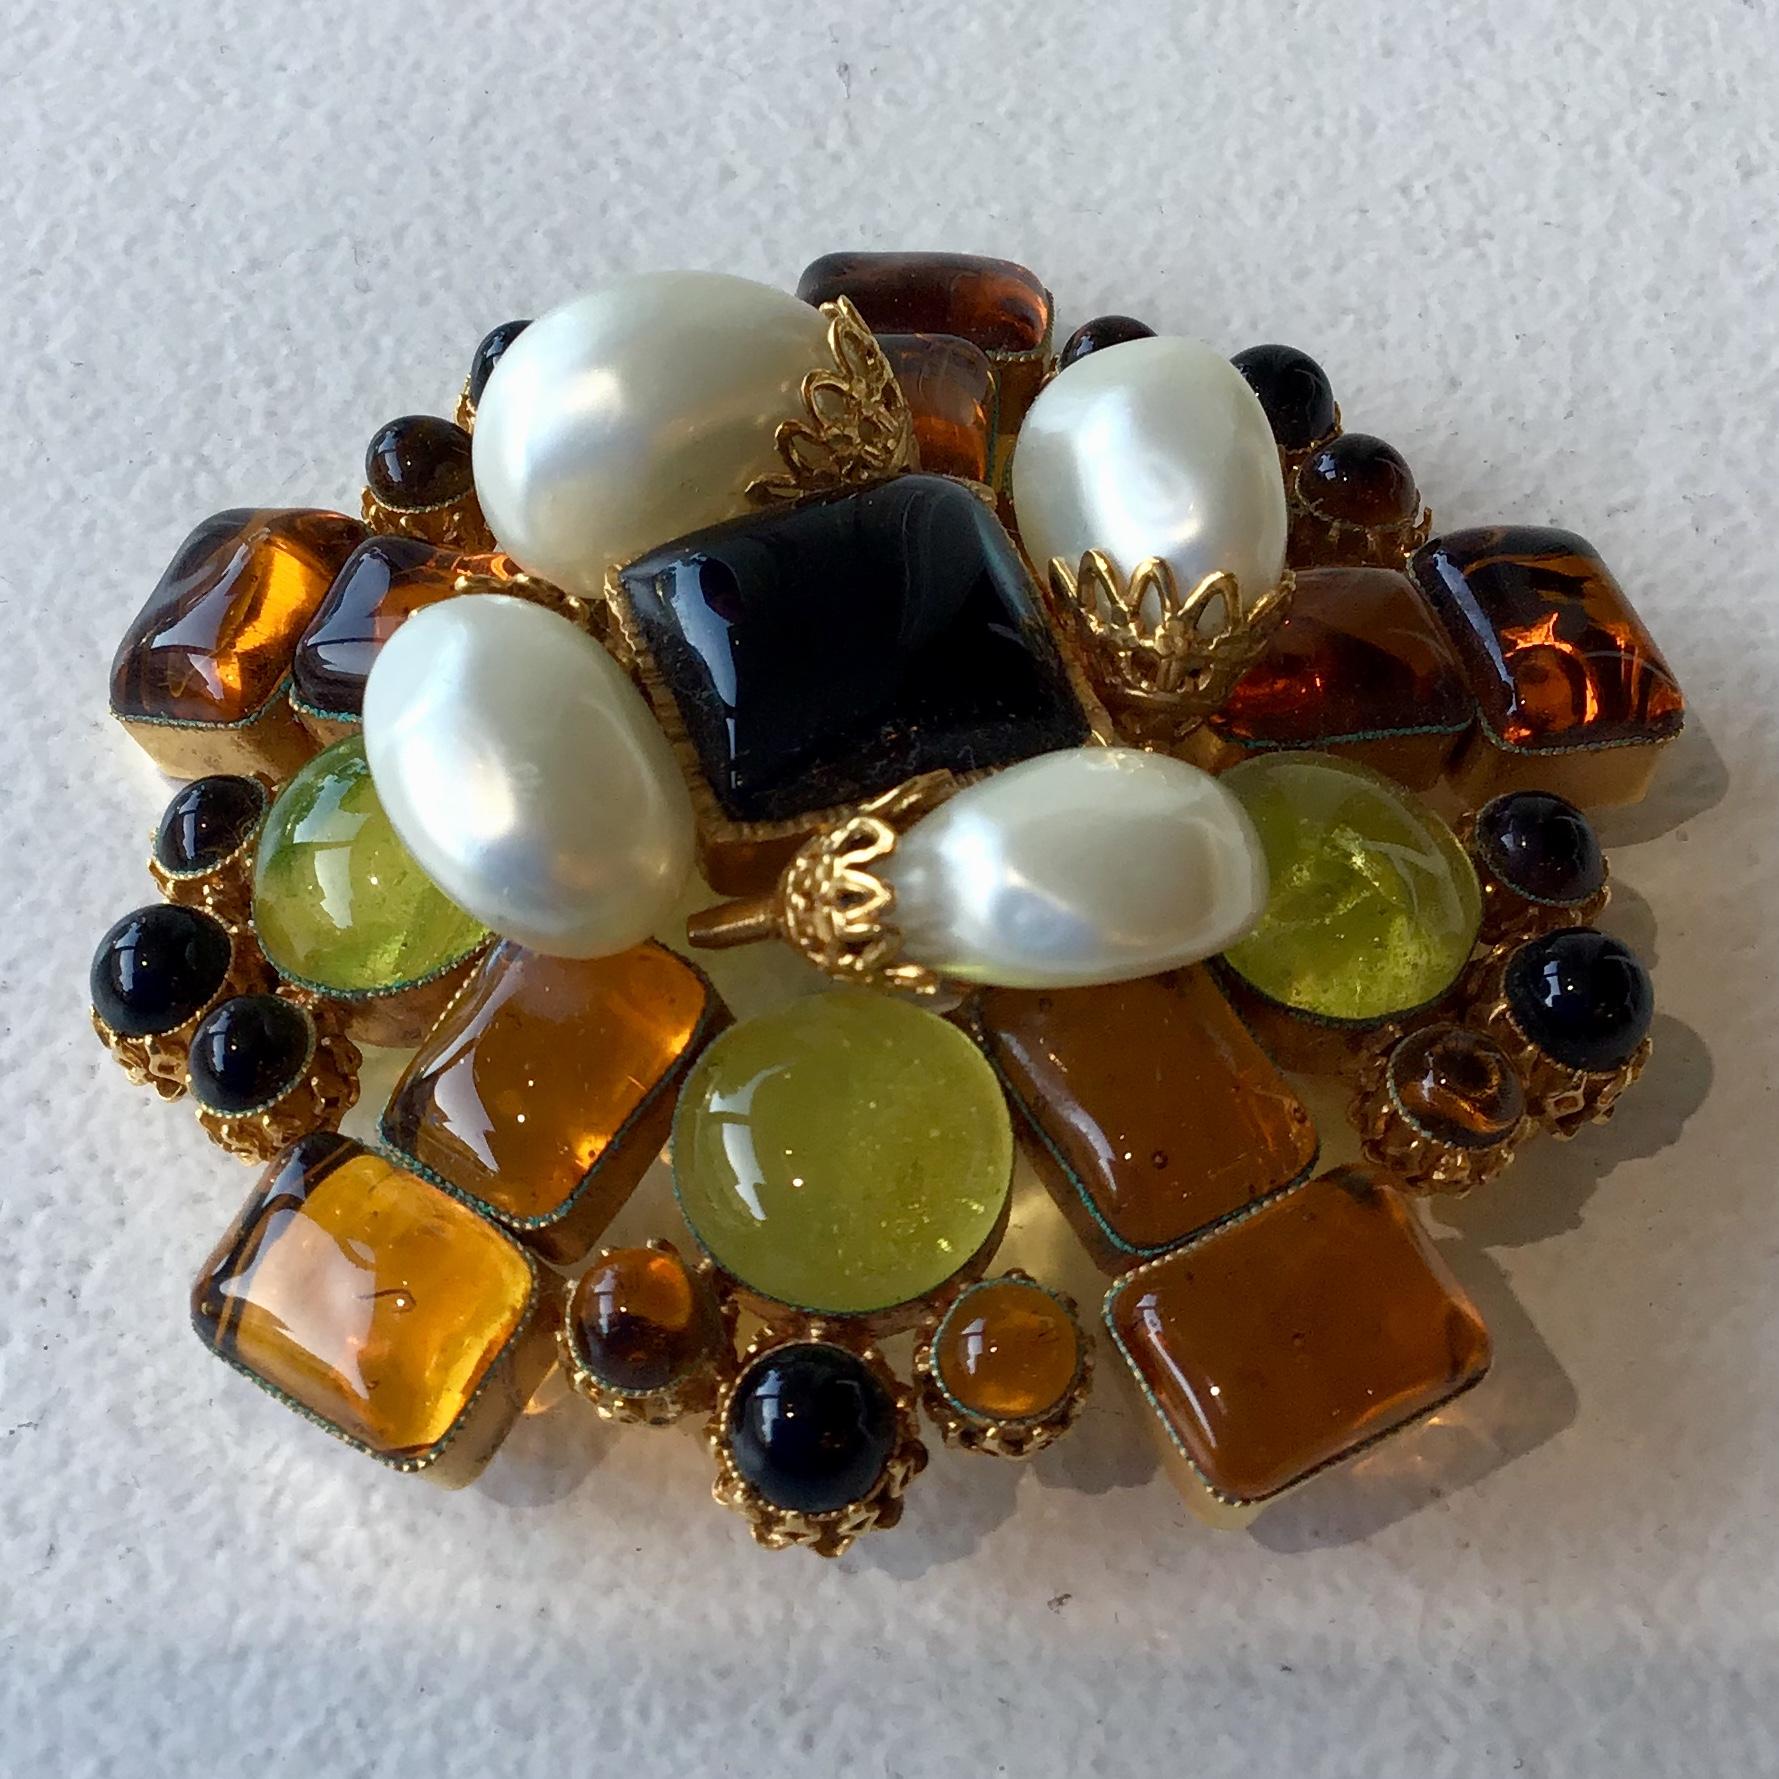 Chanel Vintage Gripoix Brooch. Textured, gold-tone, featuring multi-colored glass embellishments along with pin closure. Hook featured on the back to transform brooch into a necklace (see photo attached).